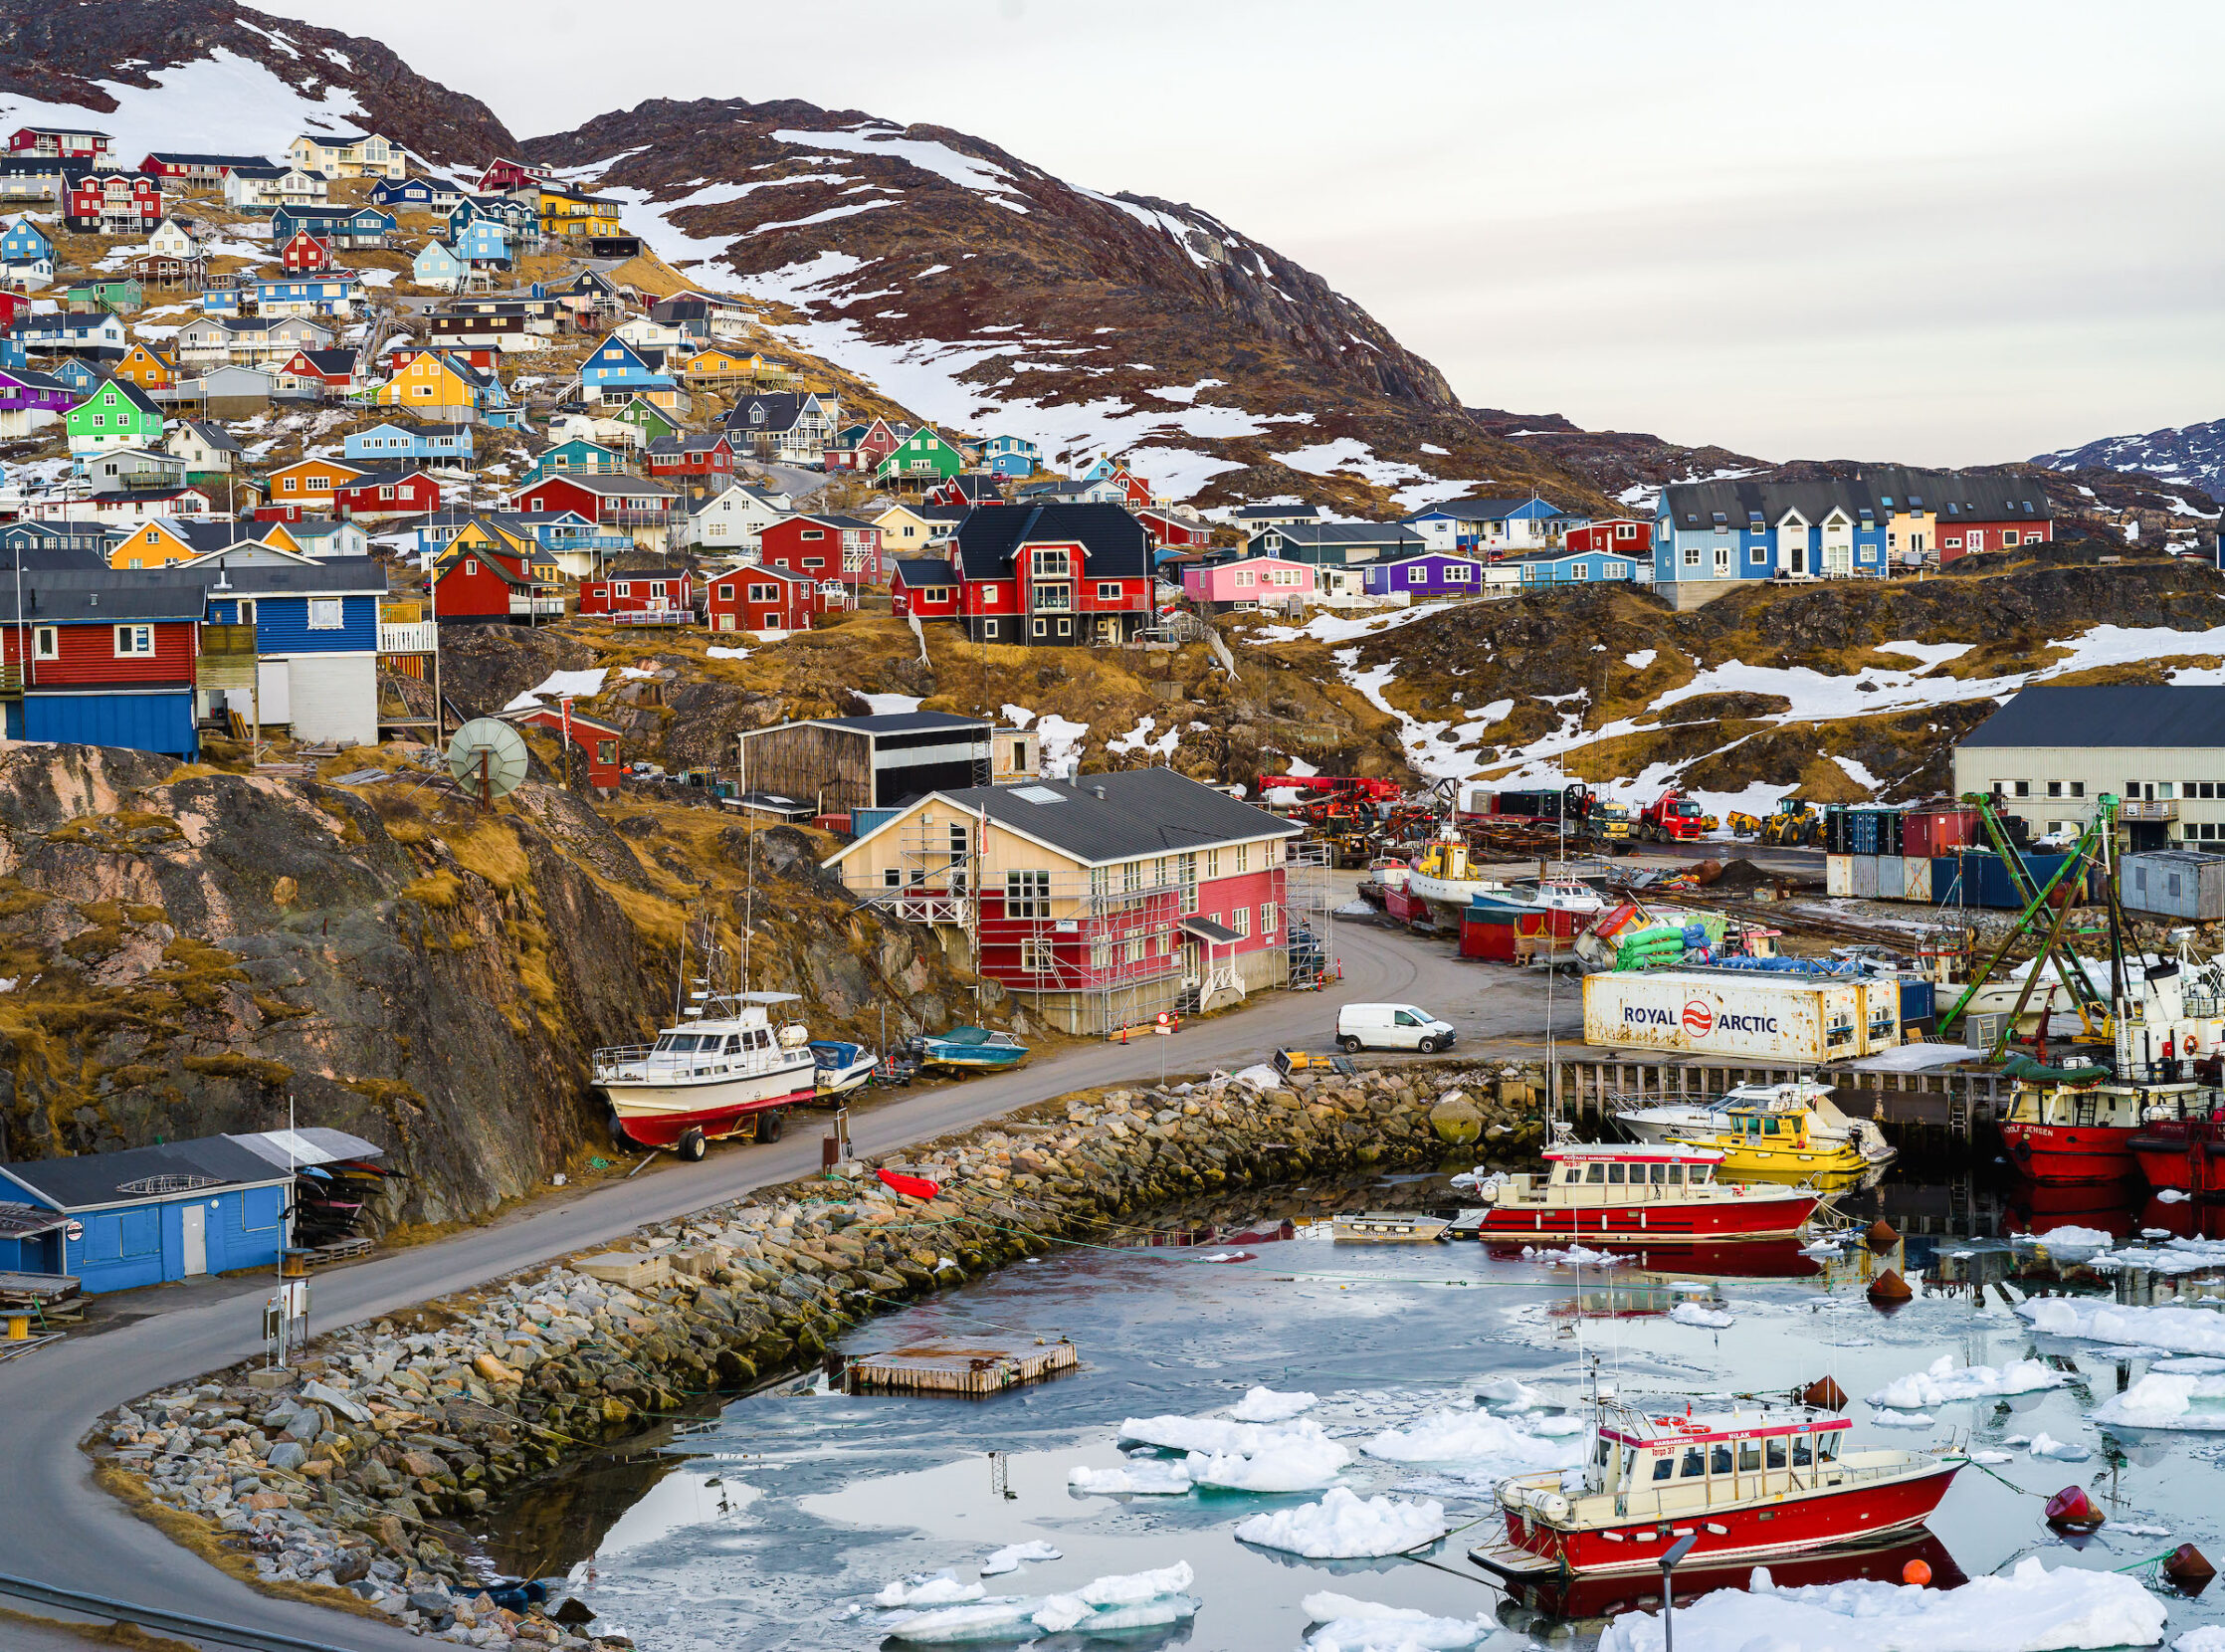 A drone shot of a rocky, coastal town of brightly colored buildings and boats with snow and ice.